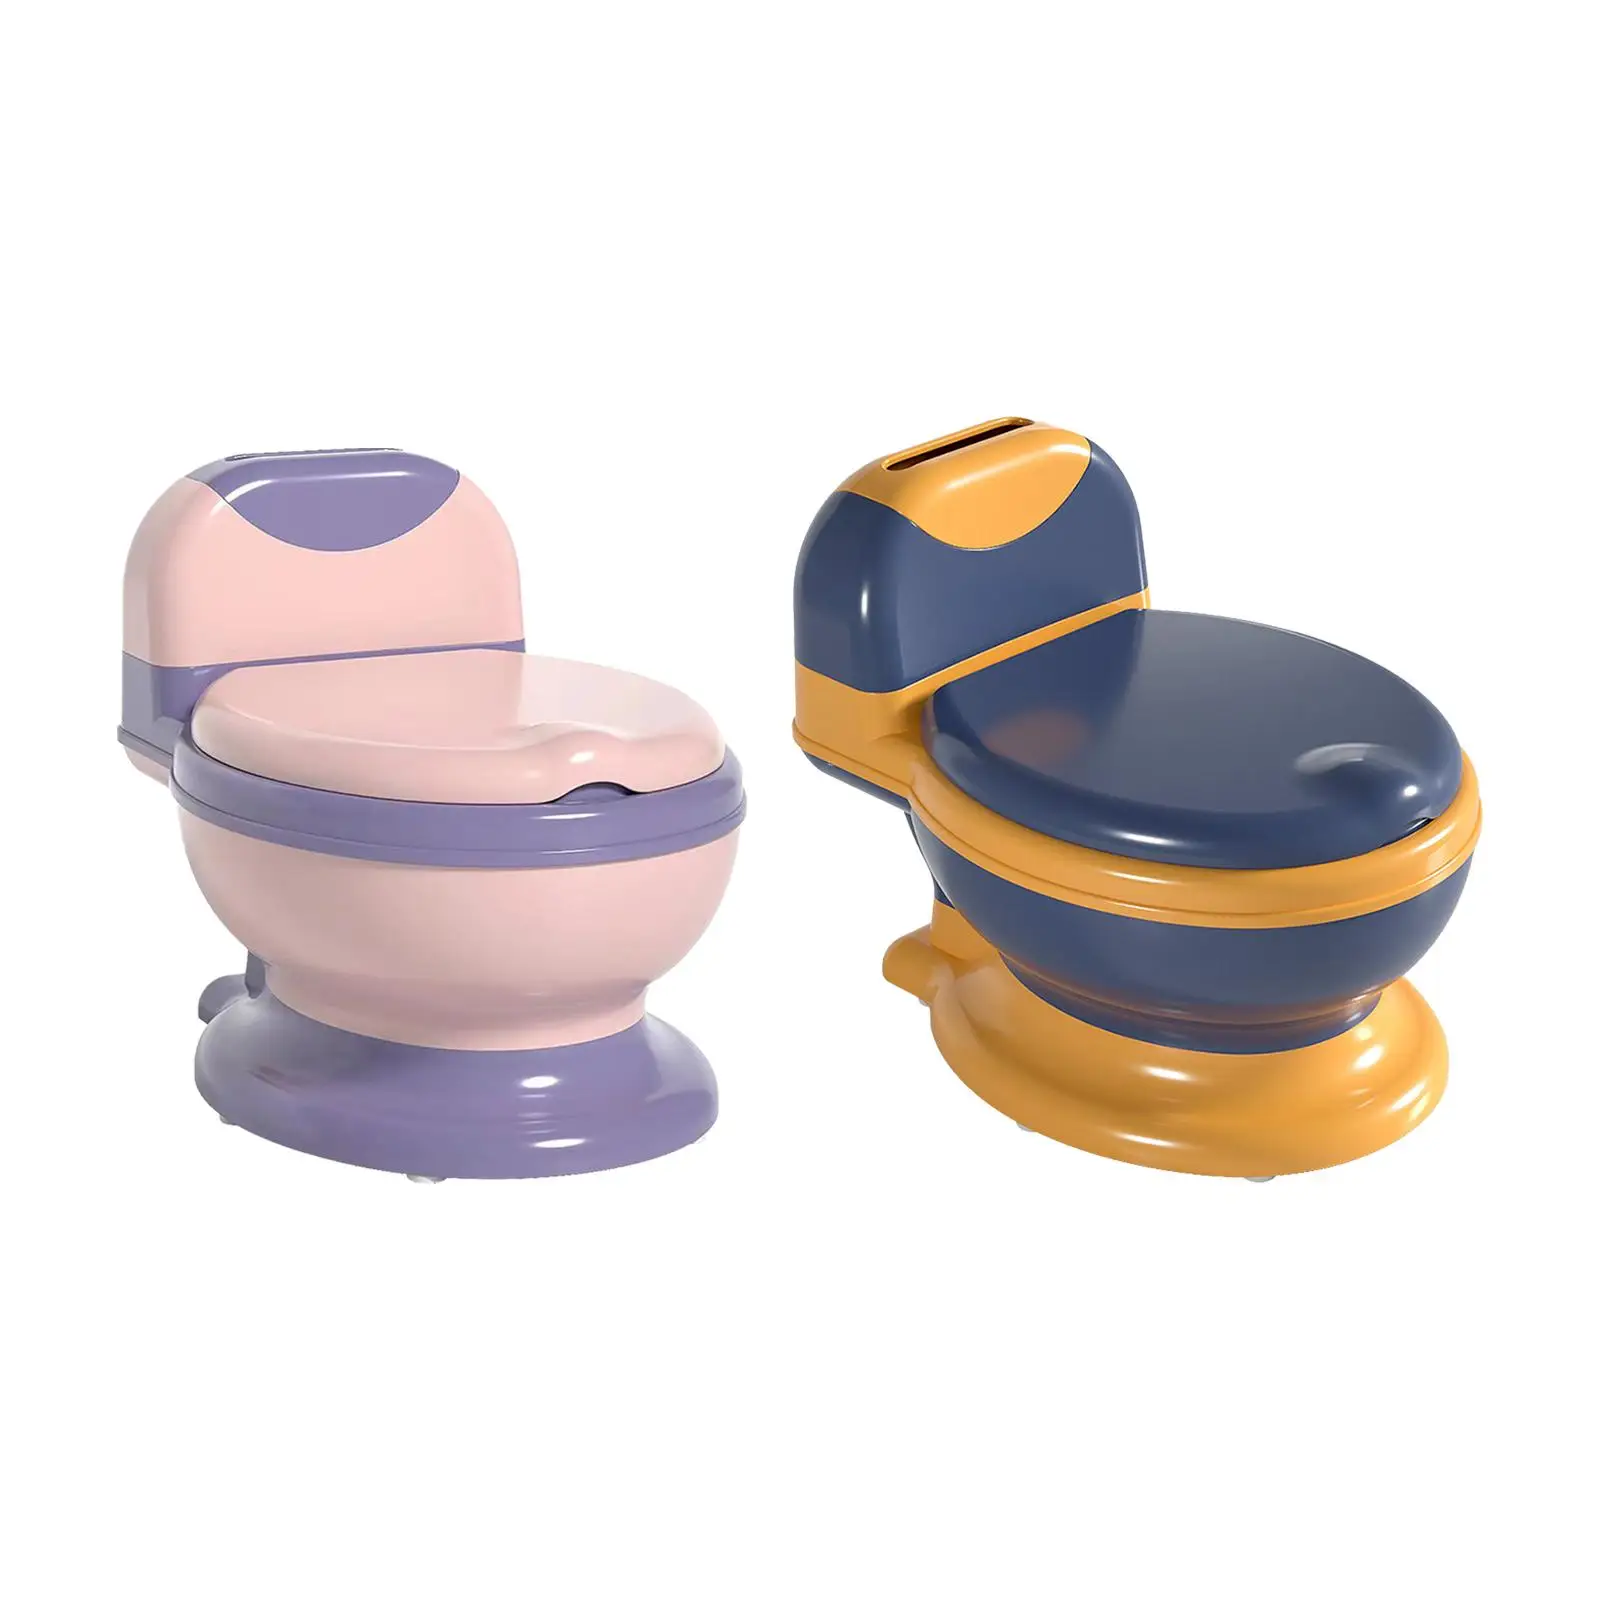 Potty Train Toilet Potty Train Seat Portable Removable Potty Pot Real Feel Potty for Baby Boys Children Toddlers Girls